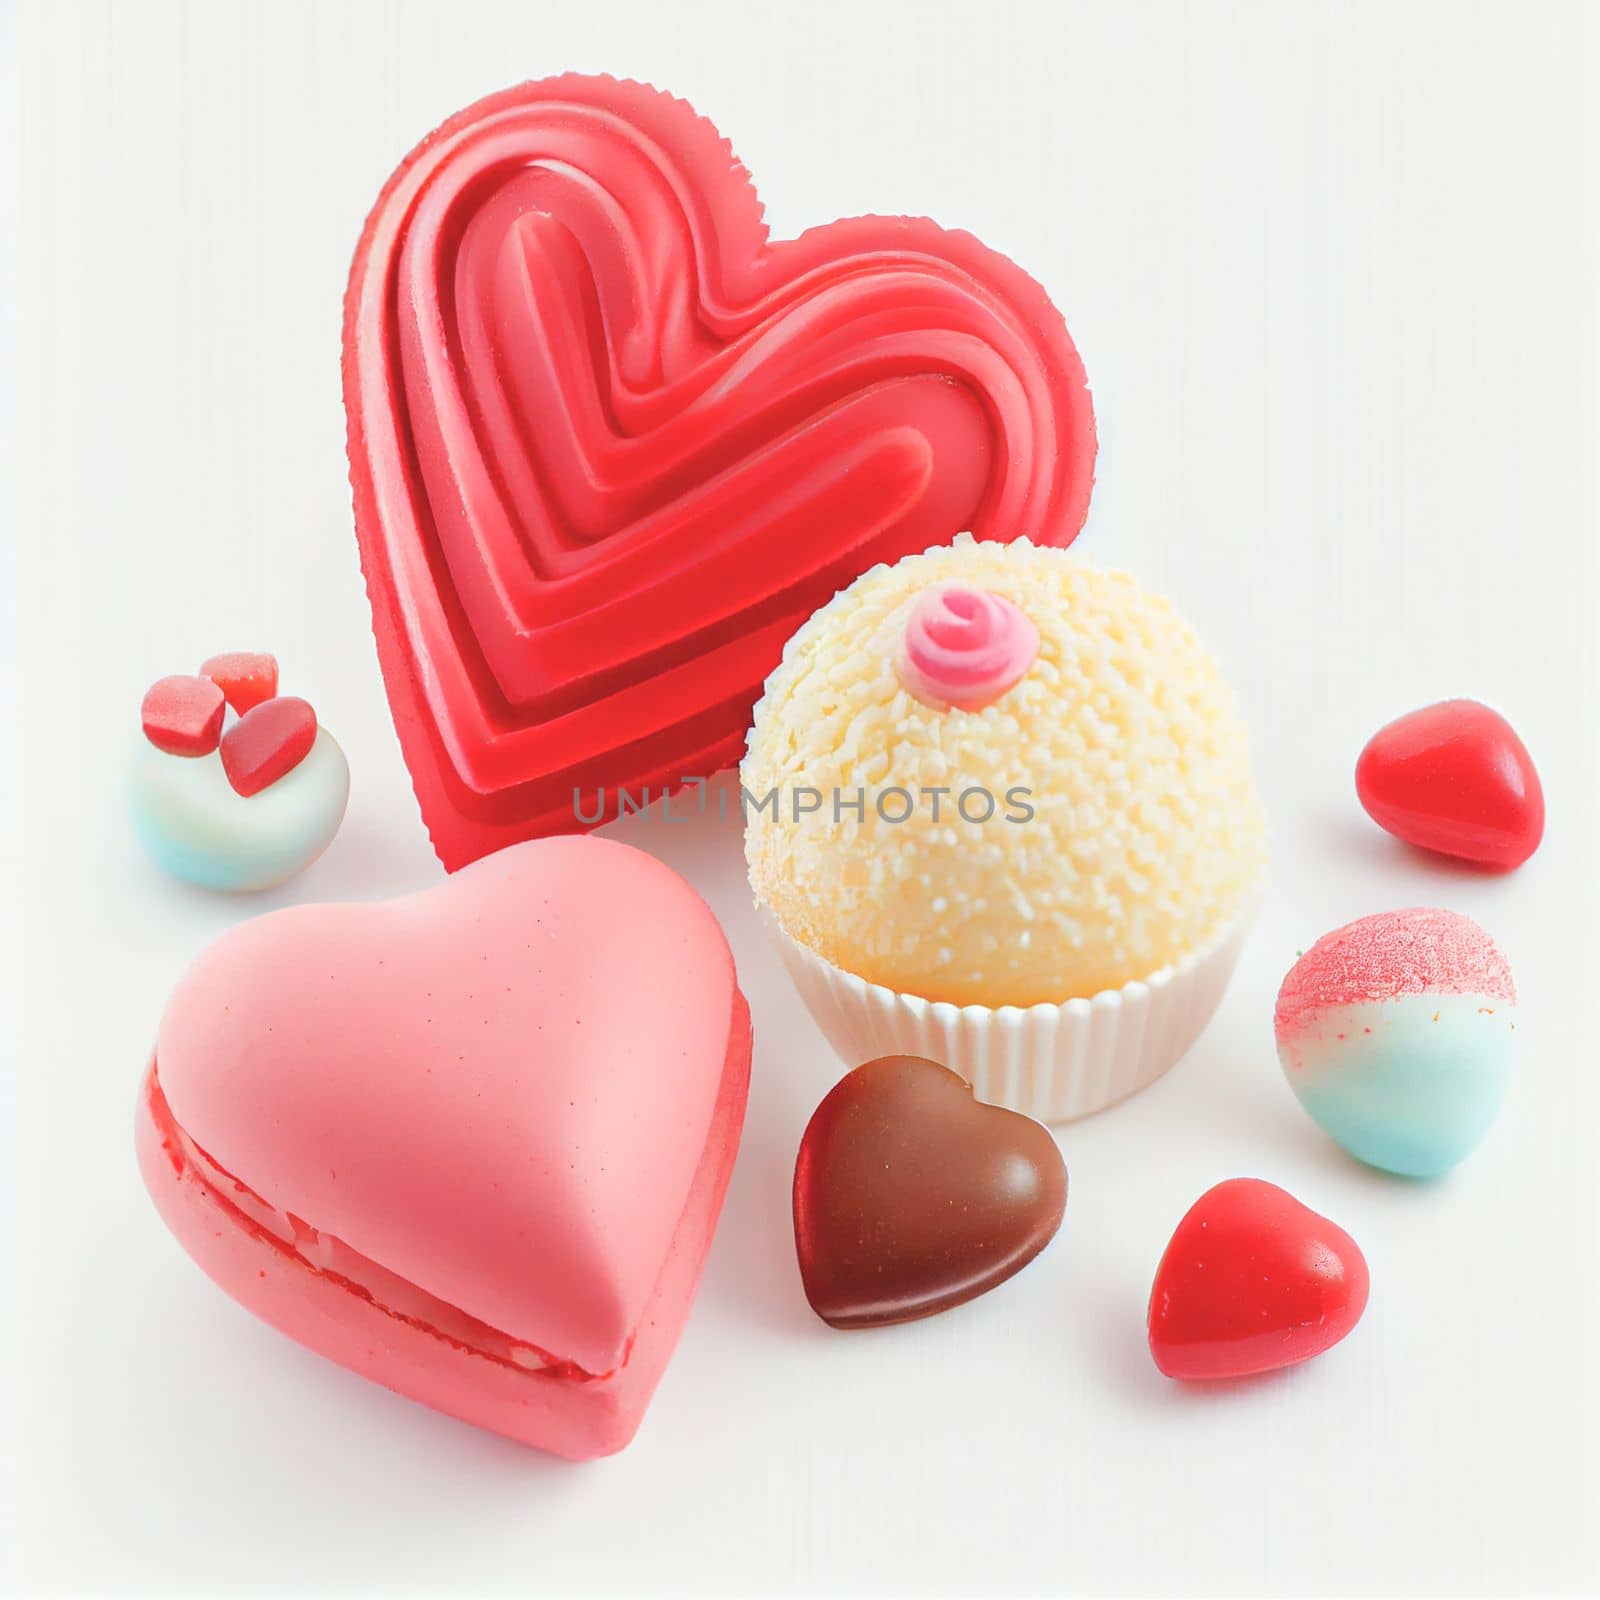 Close up shot of sweets for Valentine's Day background with copy space. Gift ideas. Design for Valentine's Day festive banner.